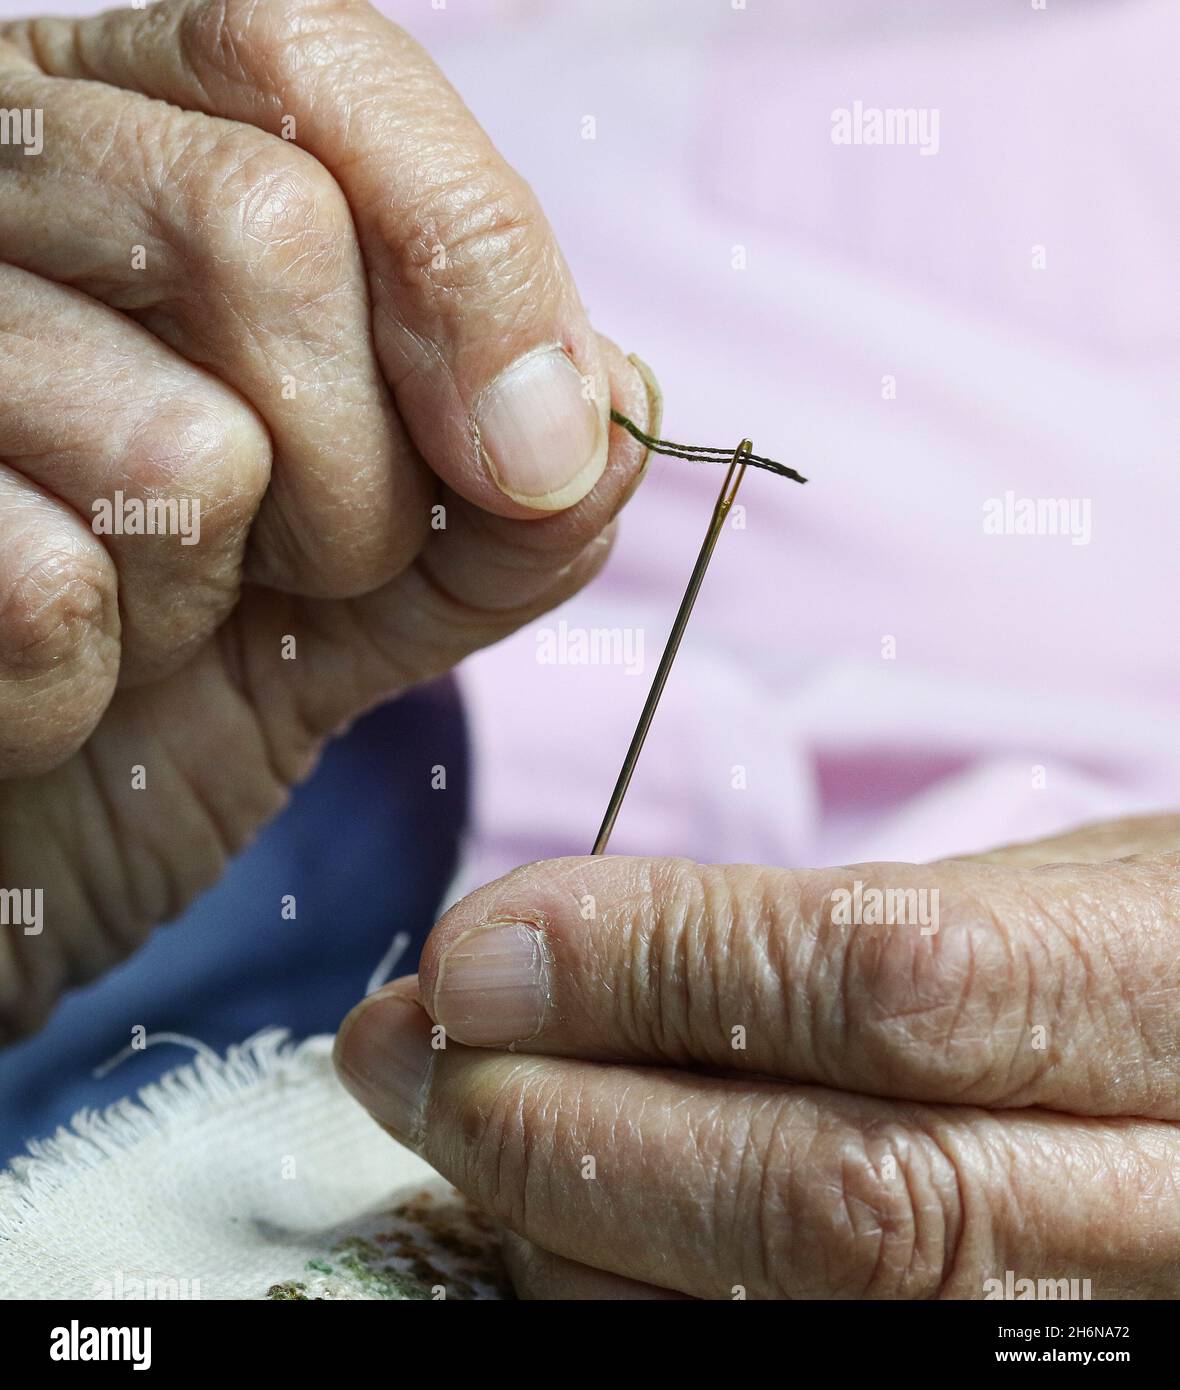 Generic image of  female elderly hands using a needle to sew. Stock Photo